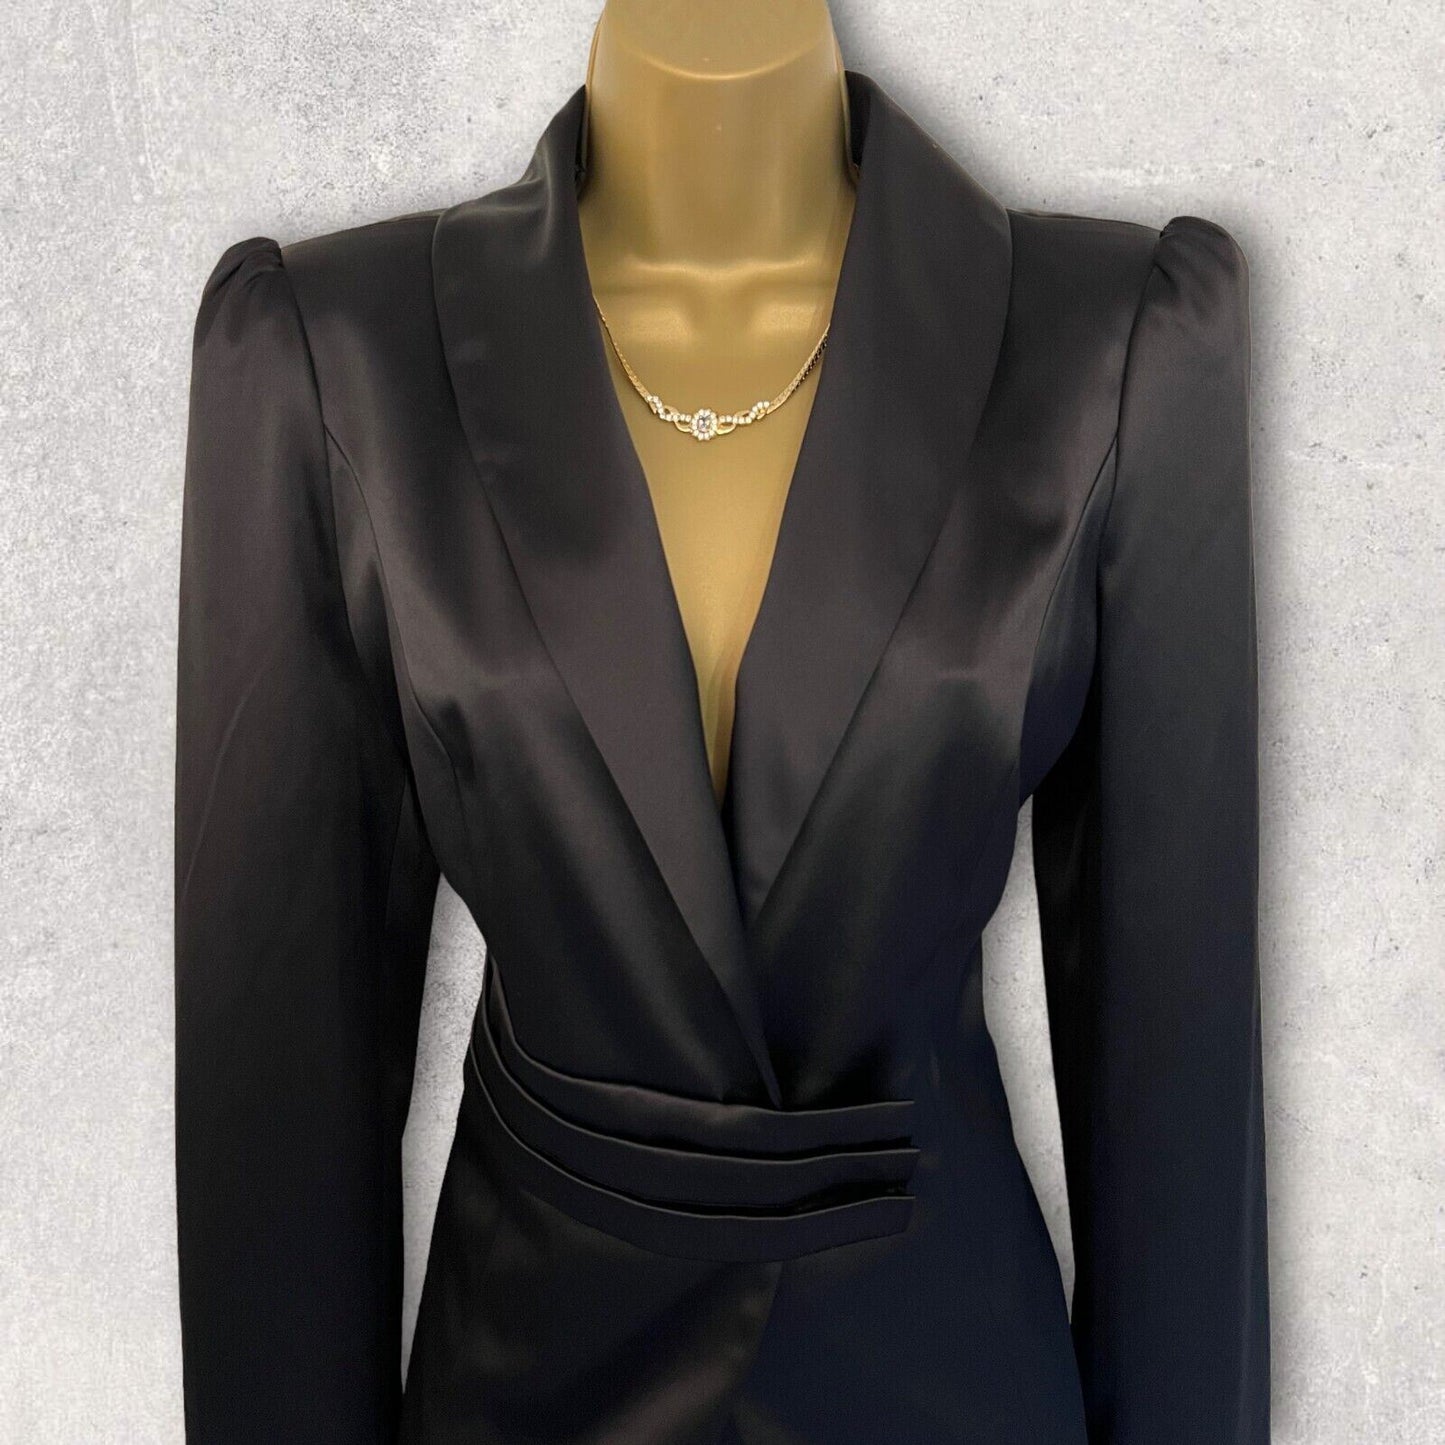 GIVe Black Satin Special Occasion Formal Jacket UK 12 US 8 EU 40 BNWT £149 Timeless Fashions